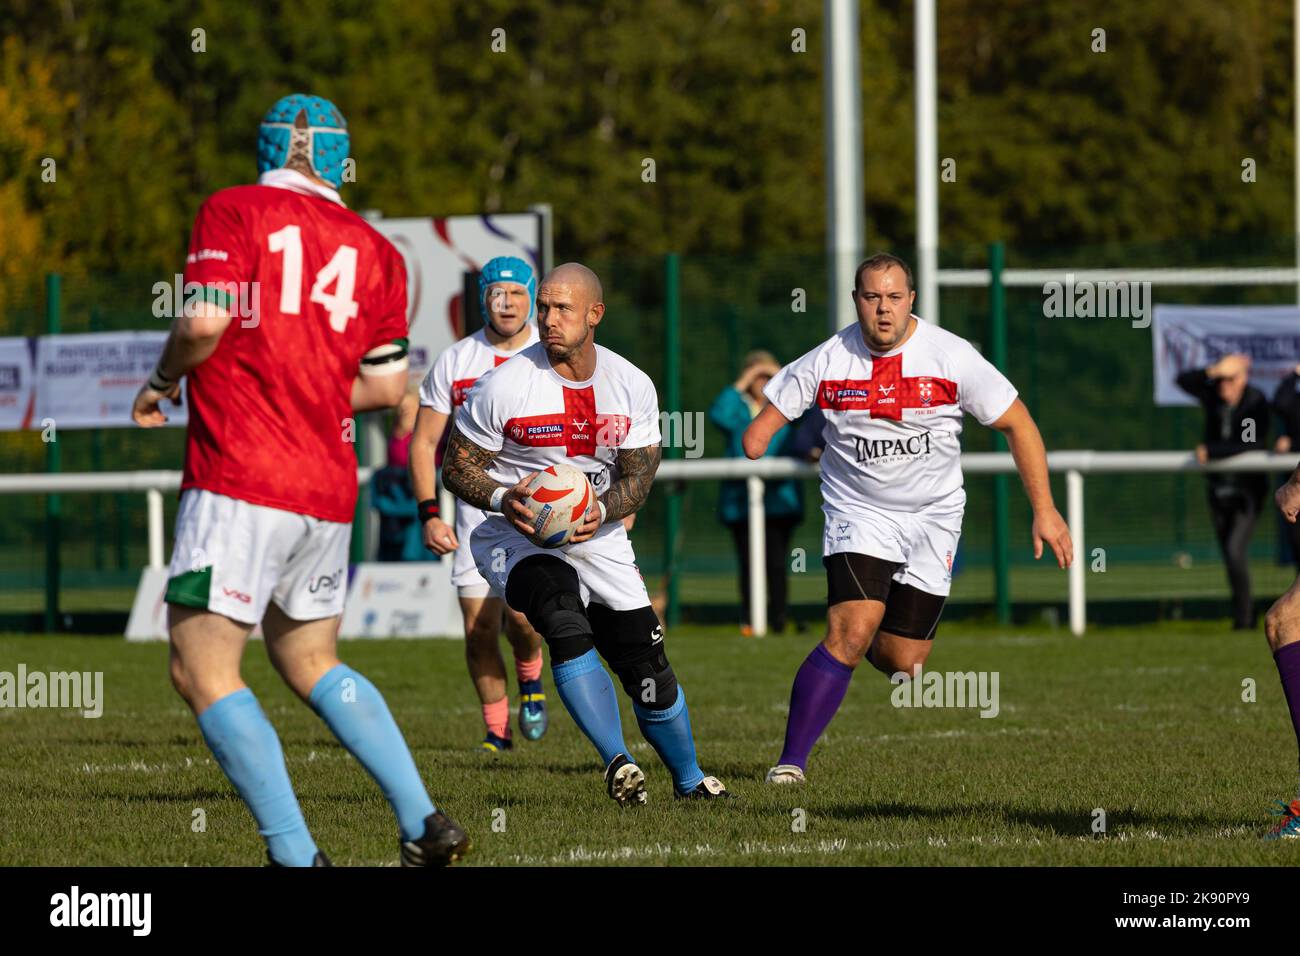 Warrington, Cheshire, England - 25 October 2022 - England took on Wales in the Physical Disability Rugby League World Cup at Victoria Park, Warrington. Credit: John Hopkins/Alamy Live News Stock Photo